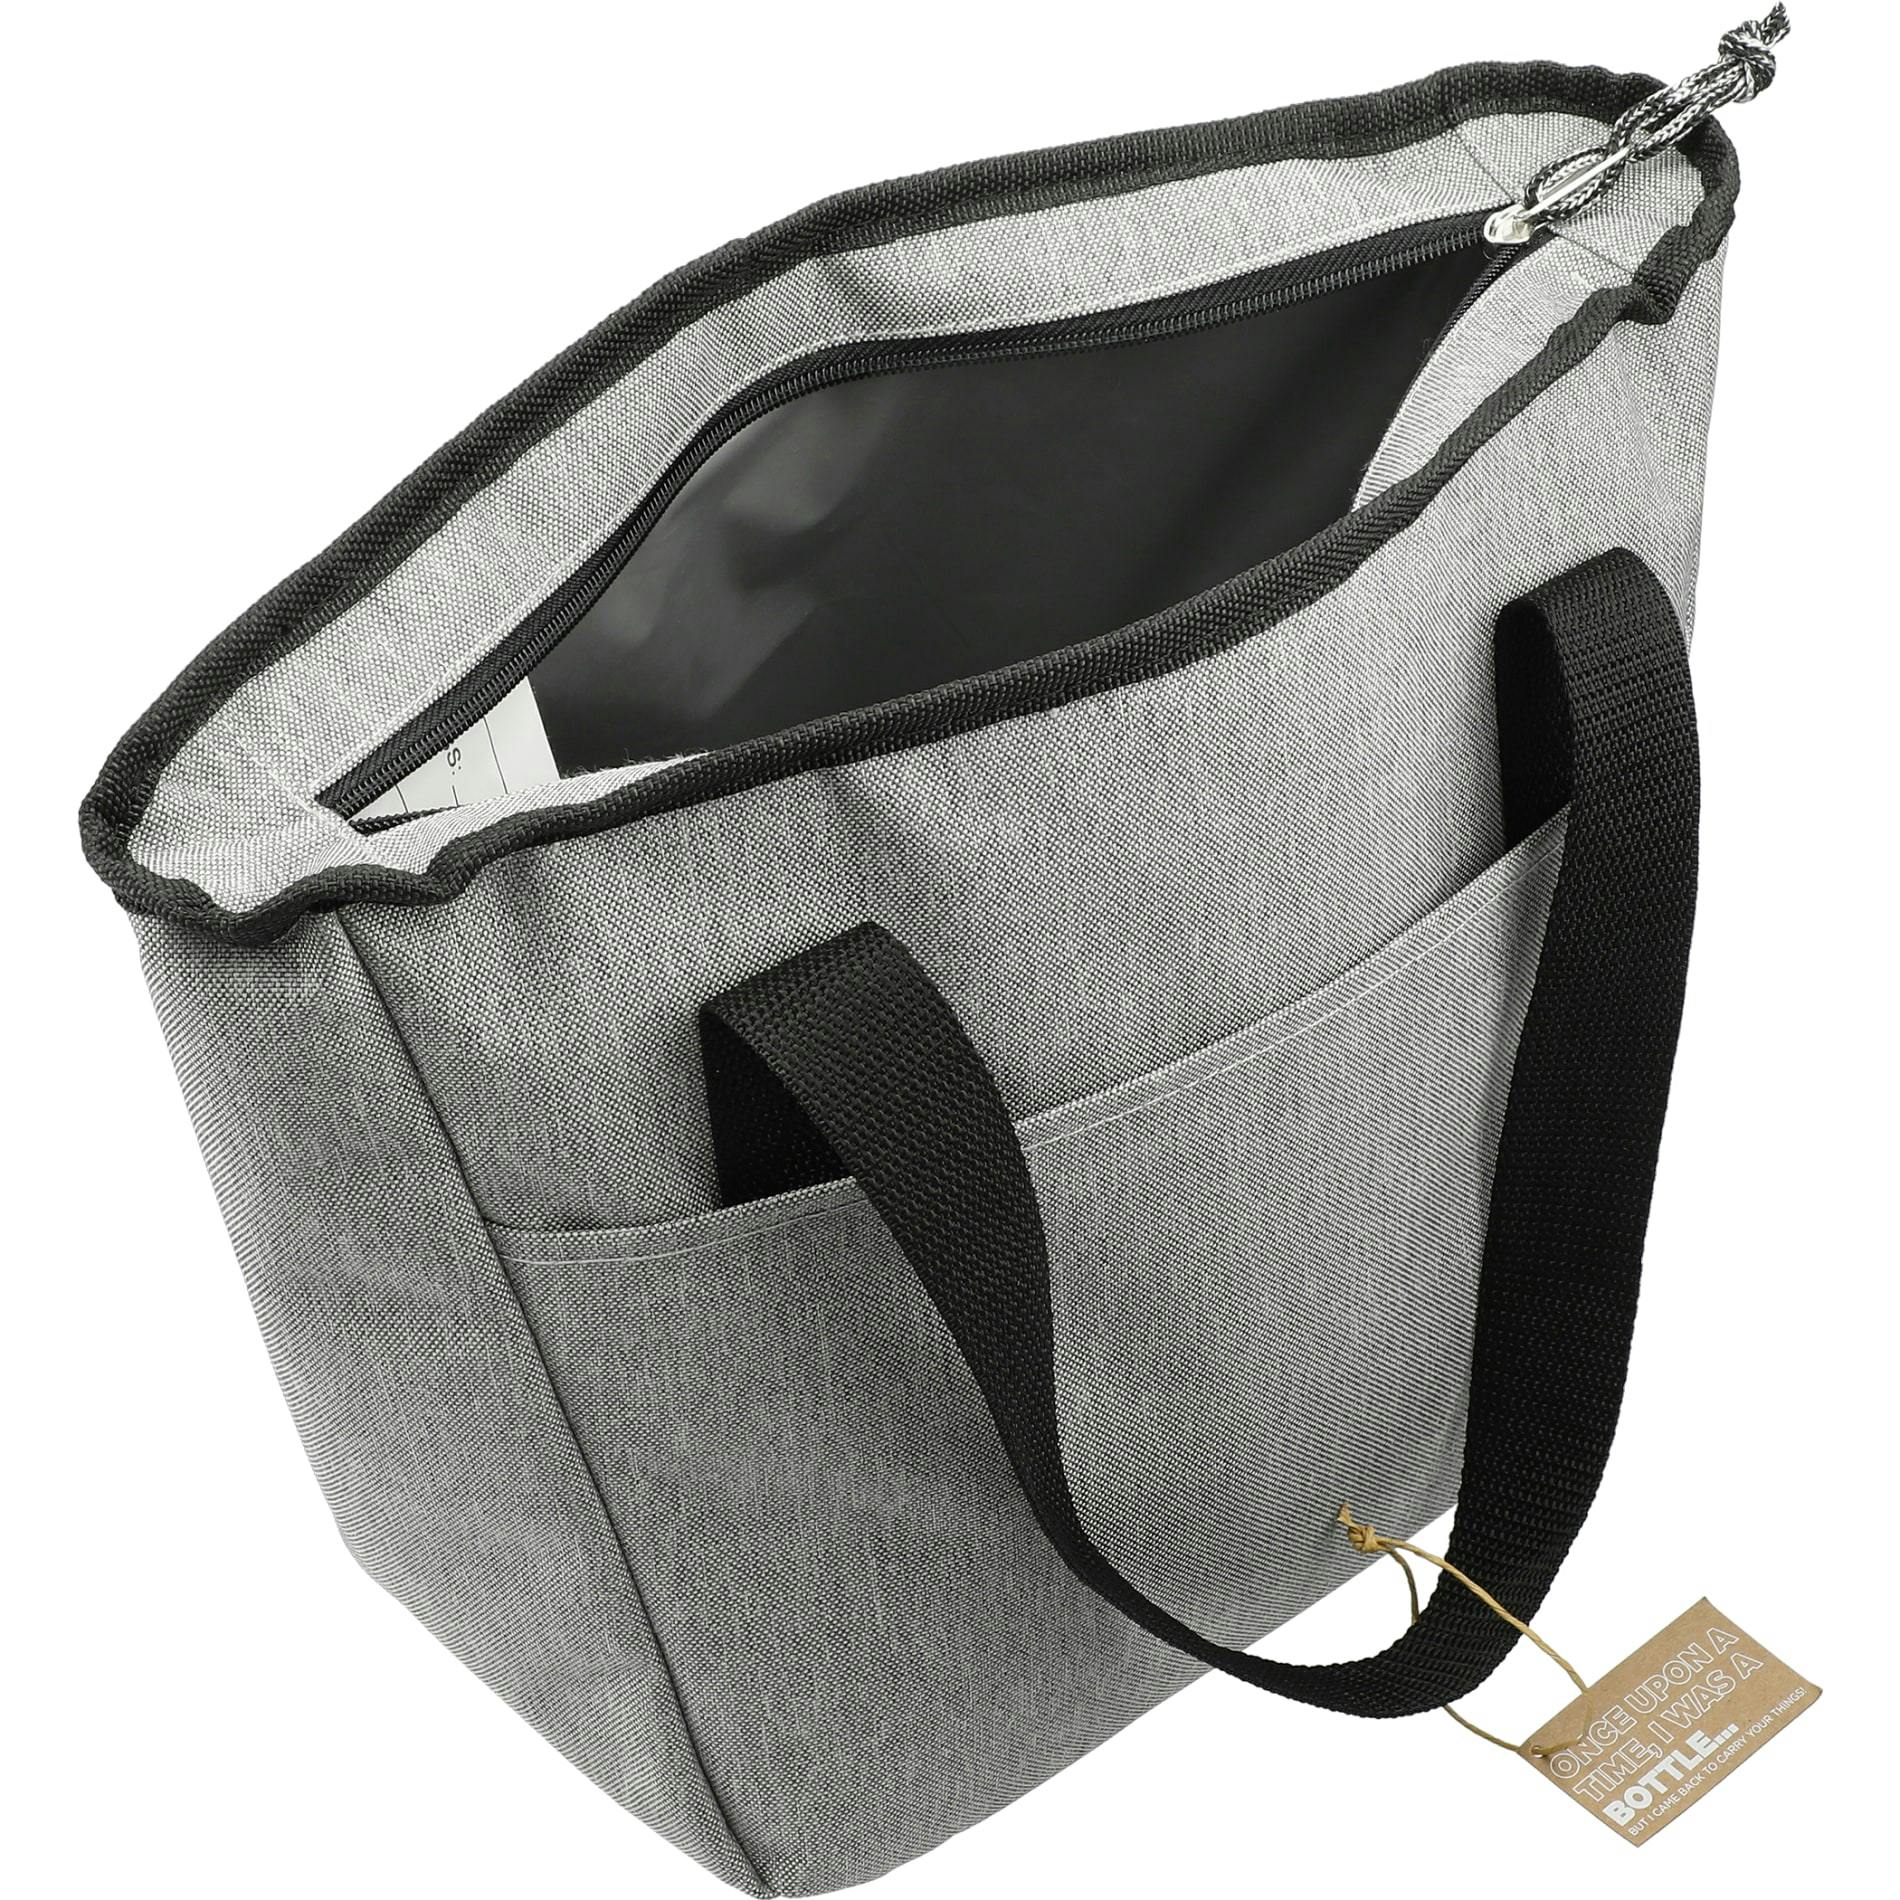 Merchant & Craft Revive Recycled 9 Can Tote Cooler - additional Image 3